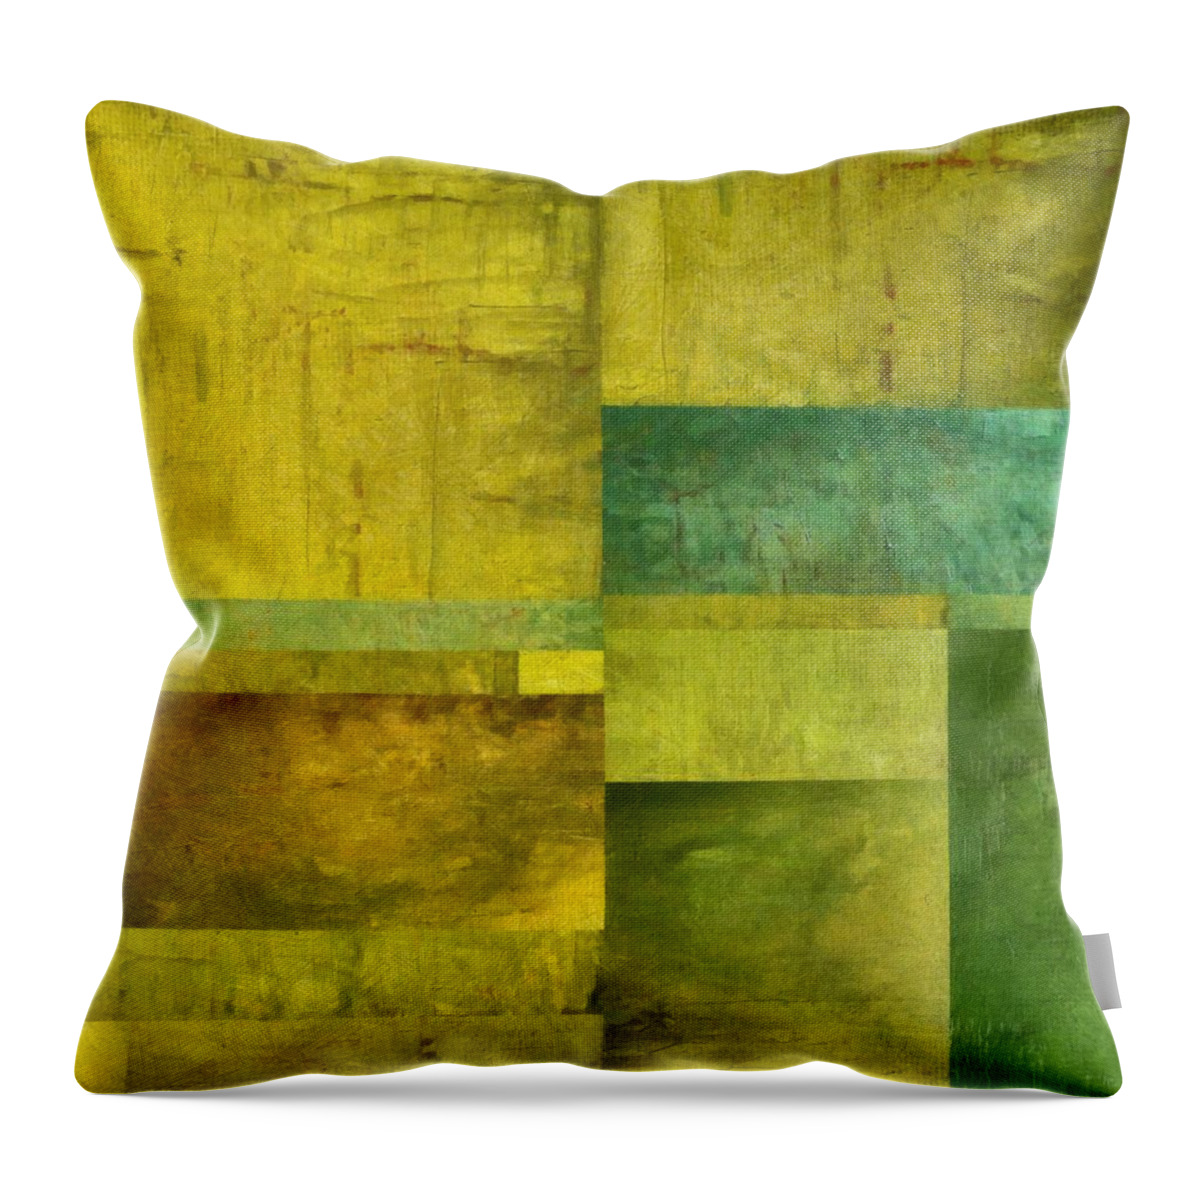 Green Throw Pillow featuring the painting Essence of Green by Michelle Calkins